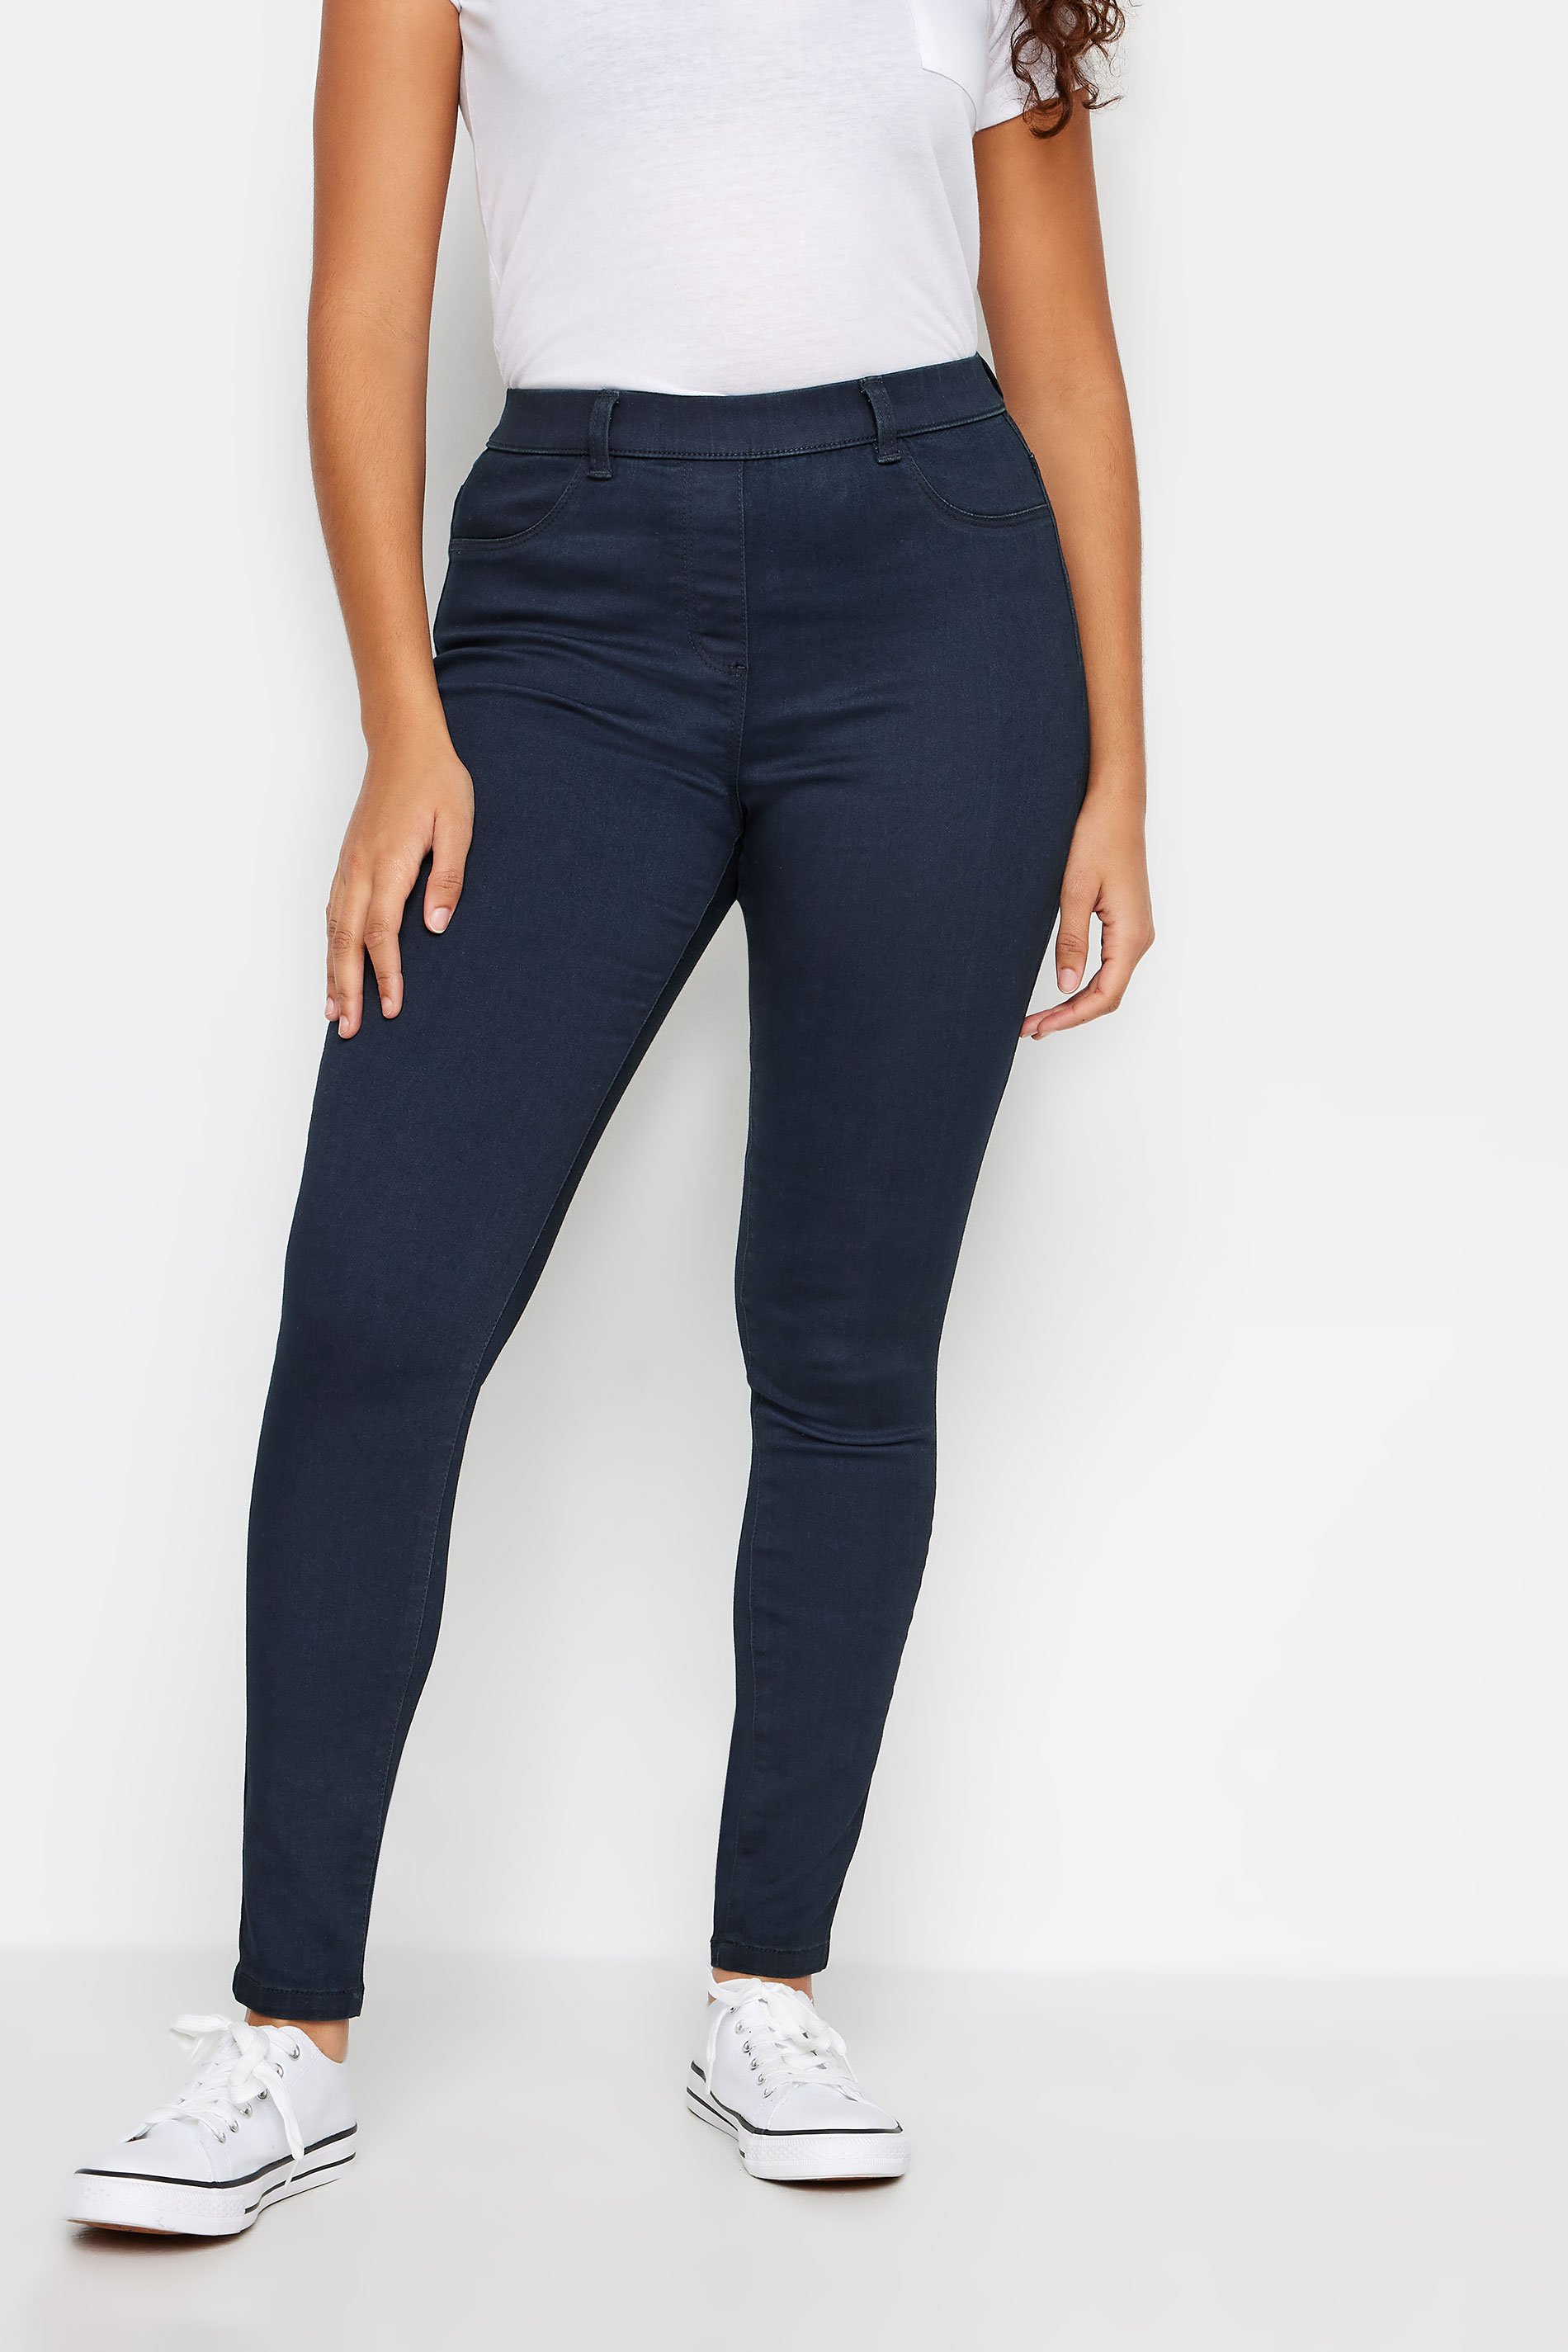 As Is Denim & Co. Comfy Knit Petite Jeggings with Side Slits